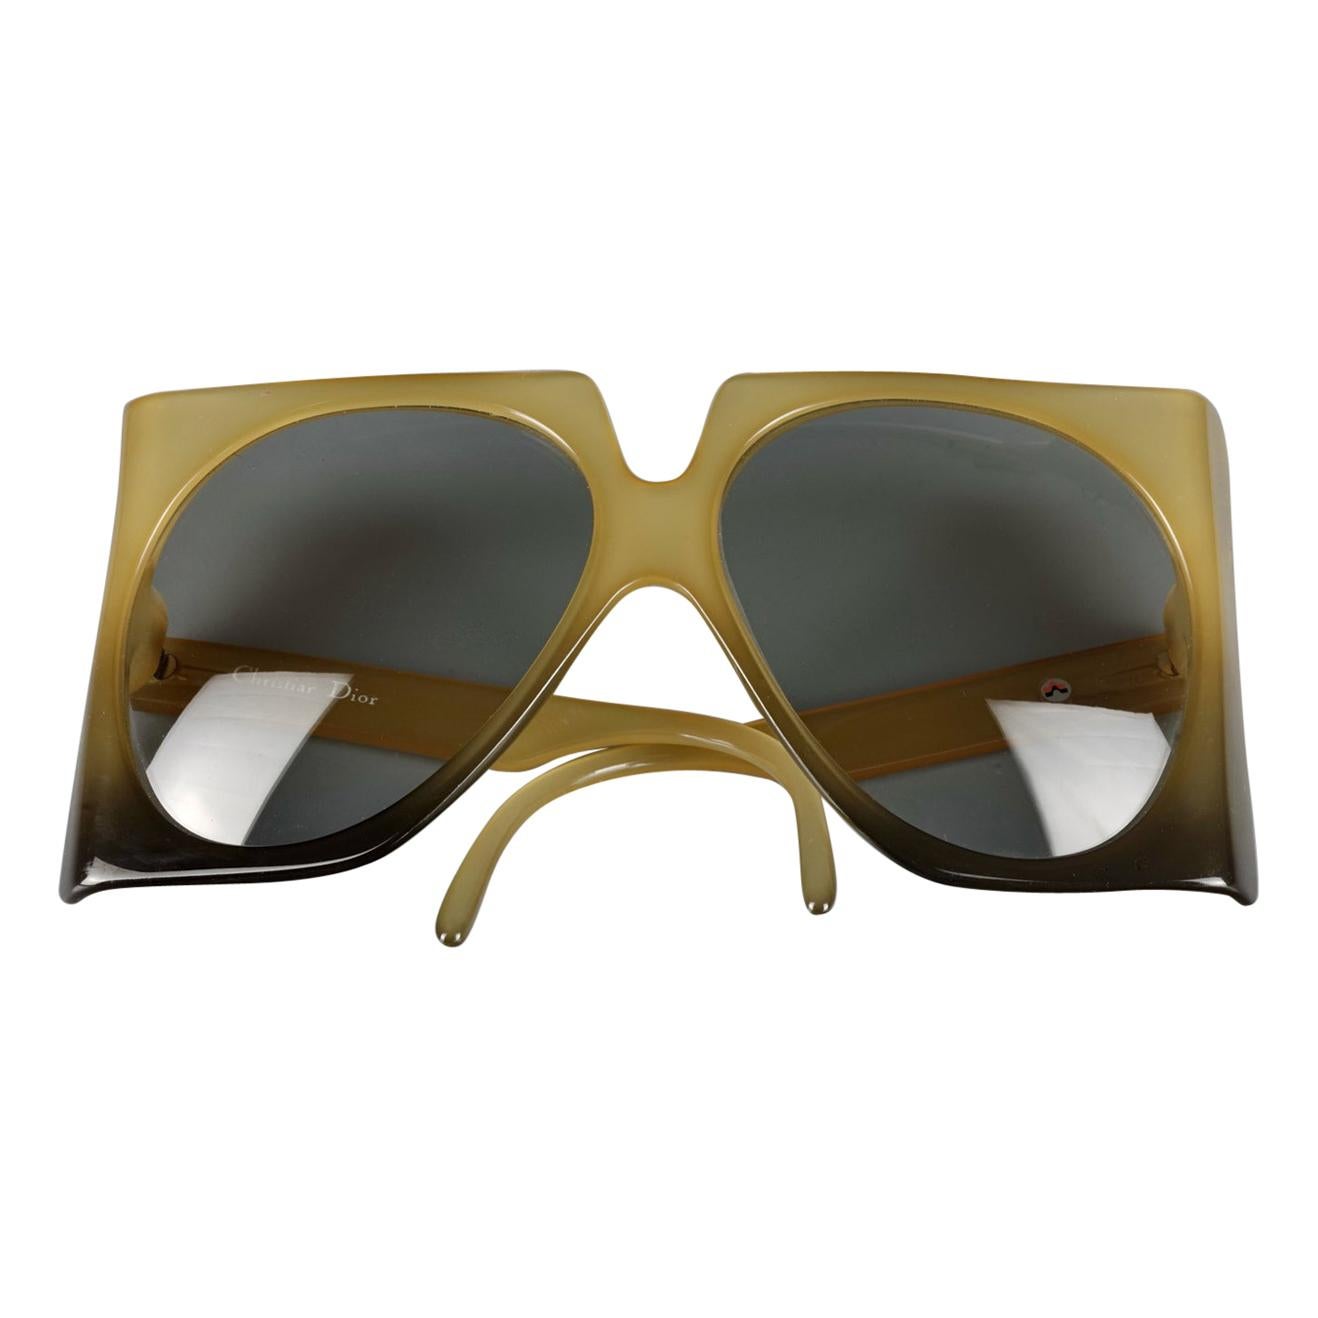 Vintage 1970s CHRISTIAN DIOR Oversized Square Space Age Sunglasses